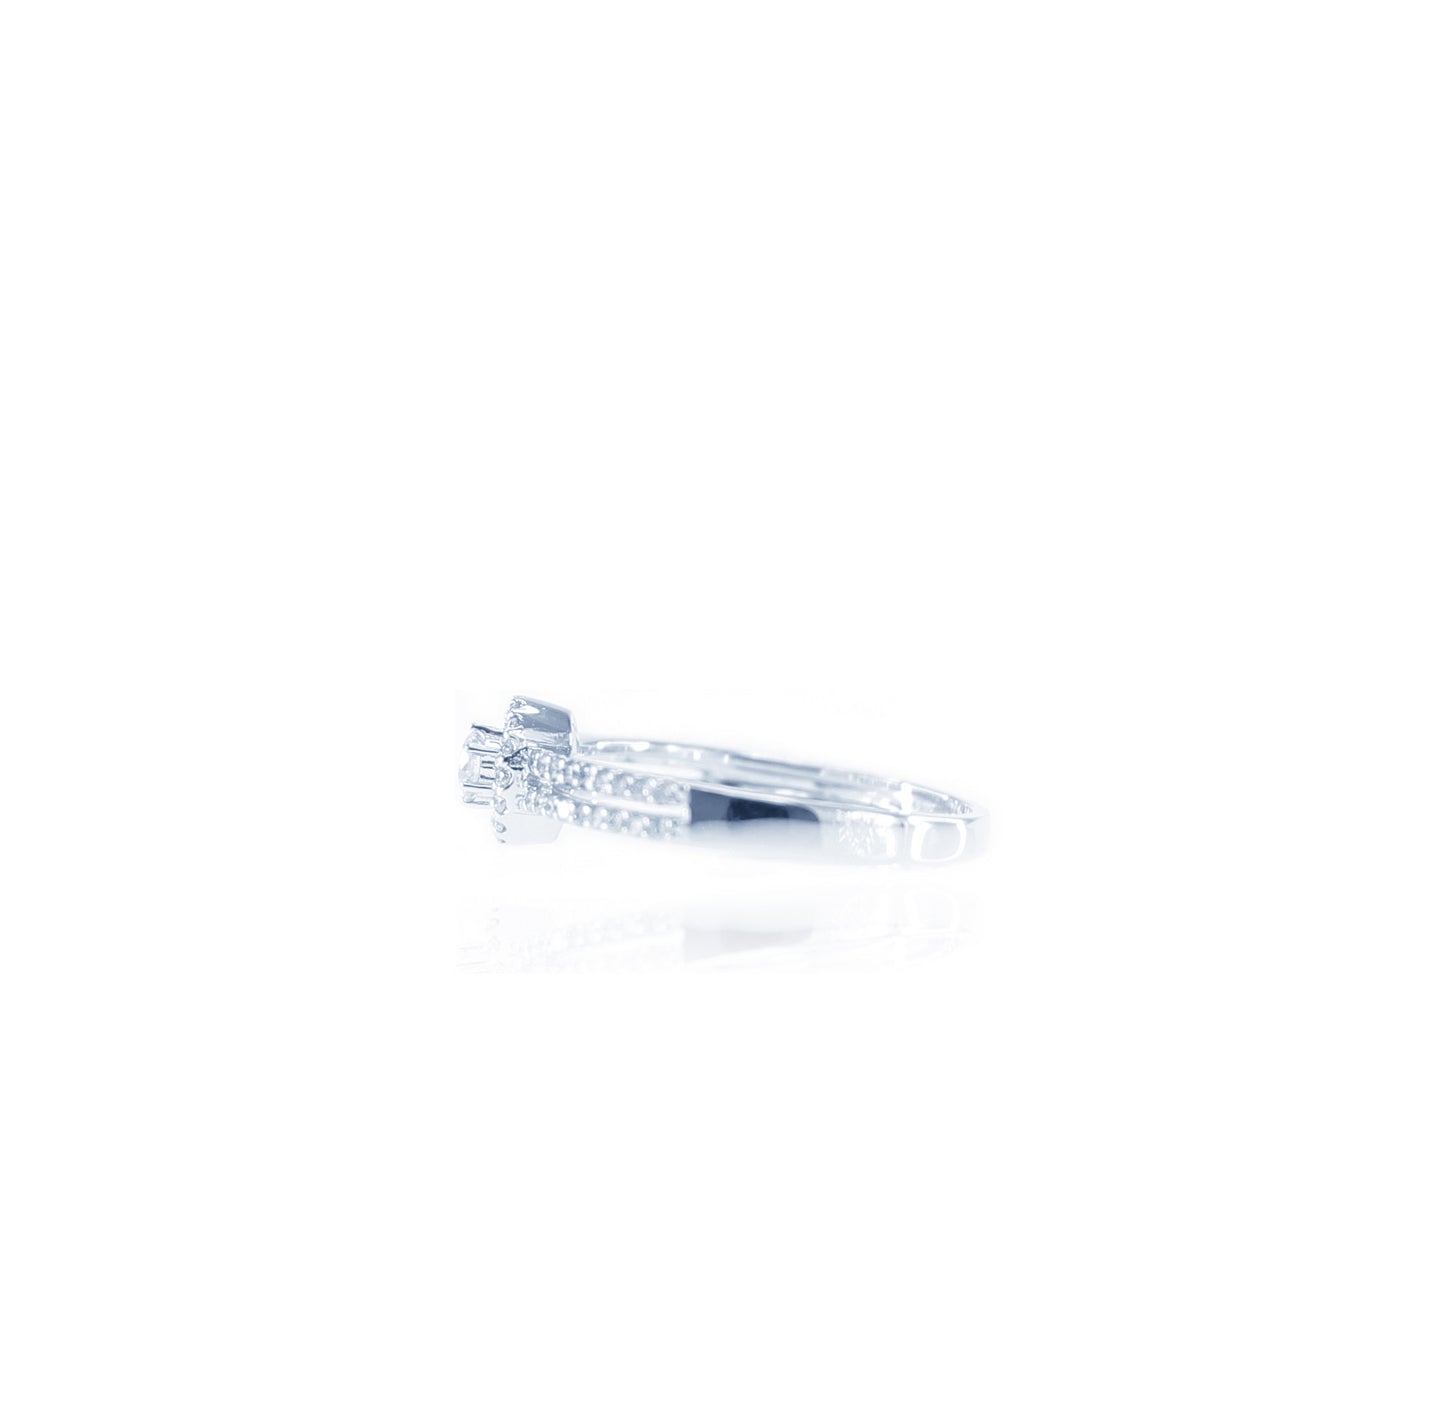 Double Shank Cirque Solitaire Diamond Ring in 18K White Gold